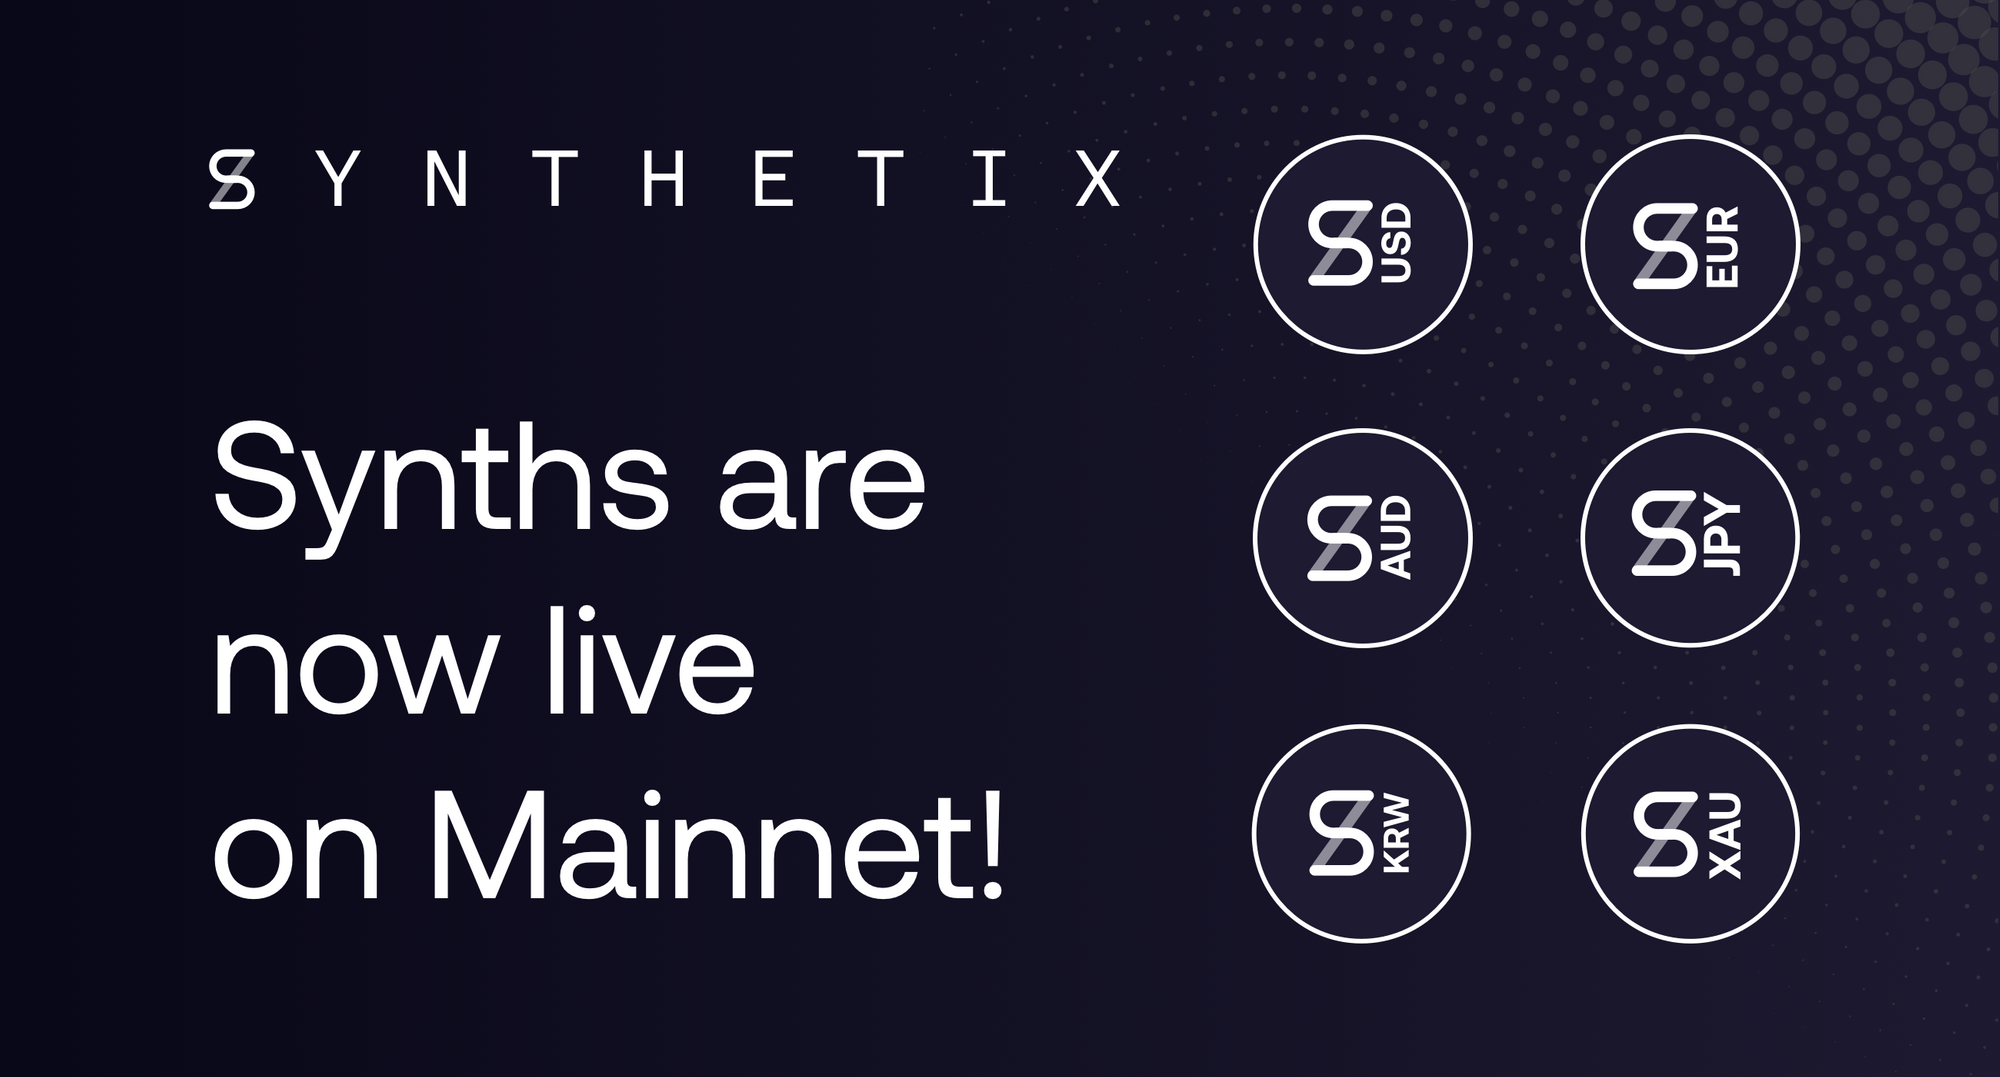 Launch: Synths are now live on Mainnet!